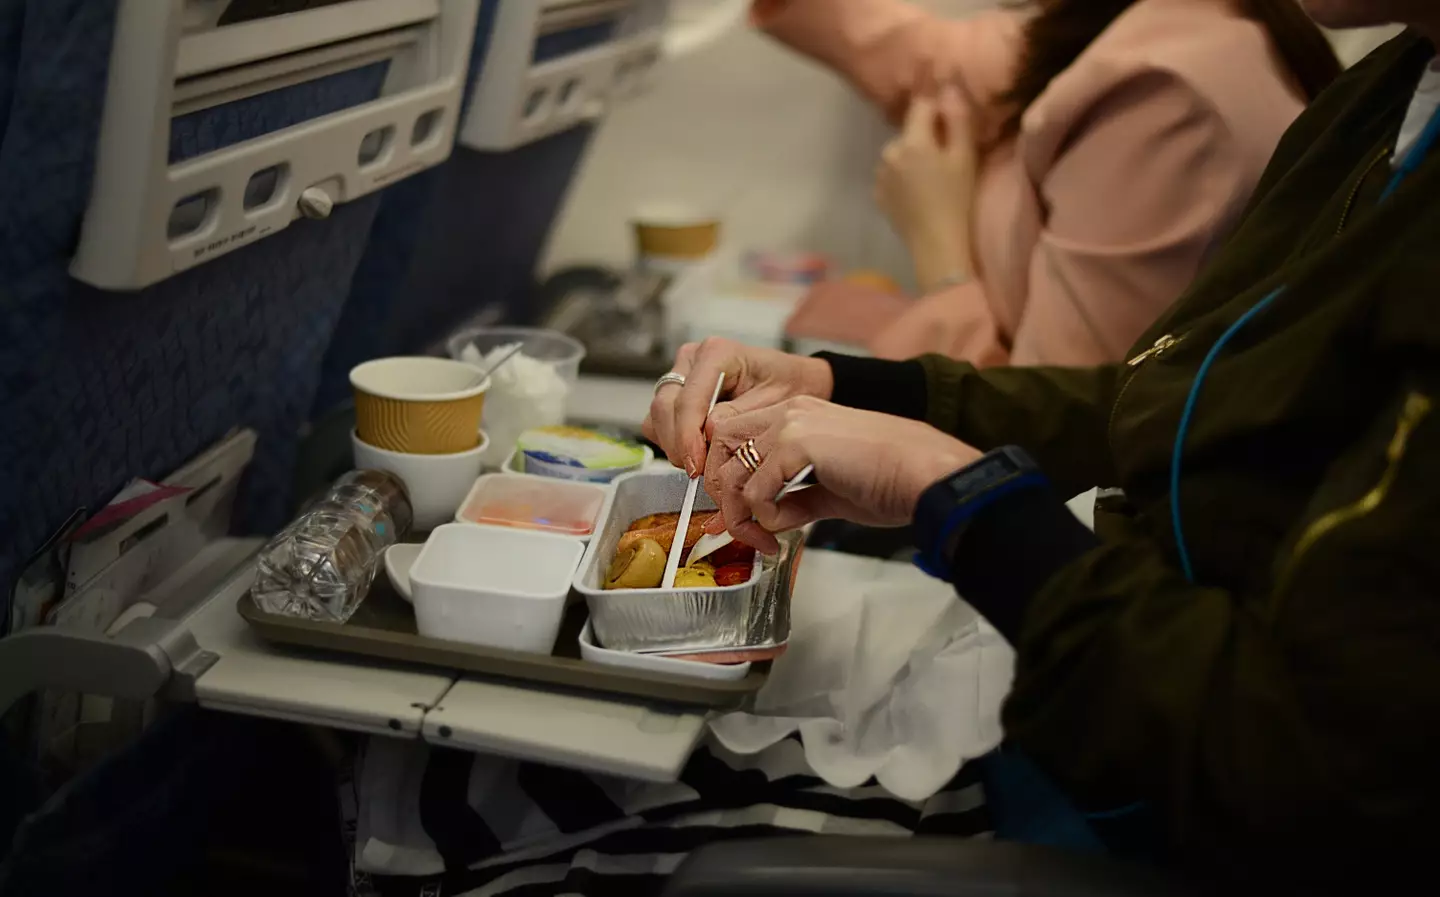 Apparently, in-flight meals should be avoided at all costs.